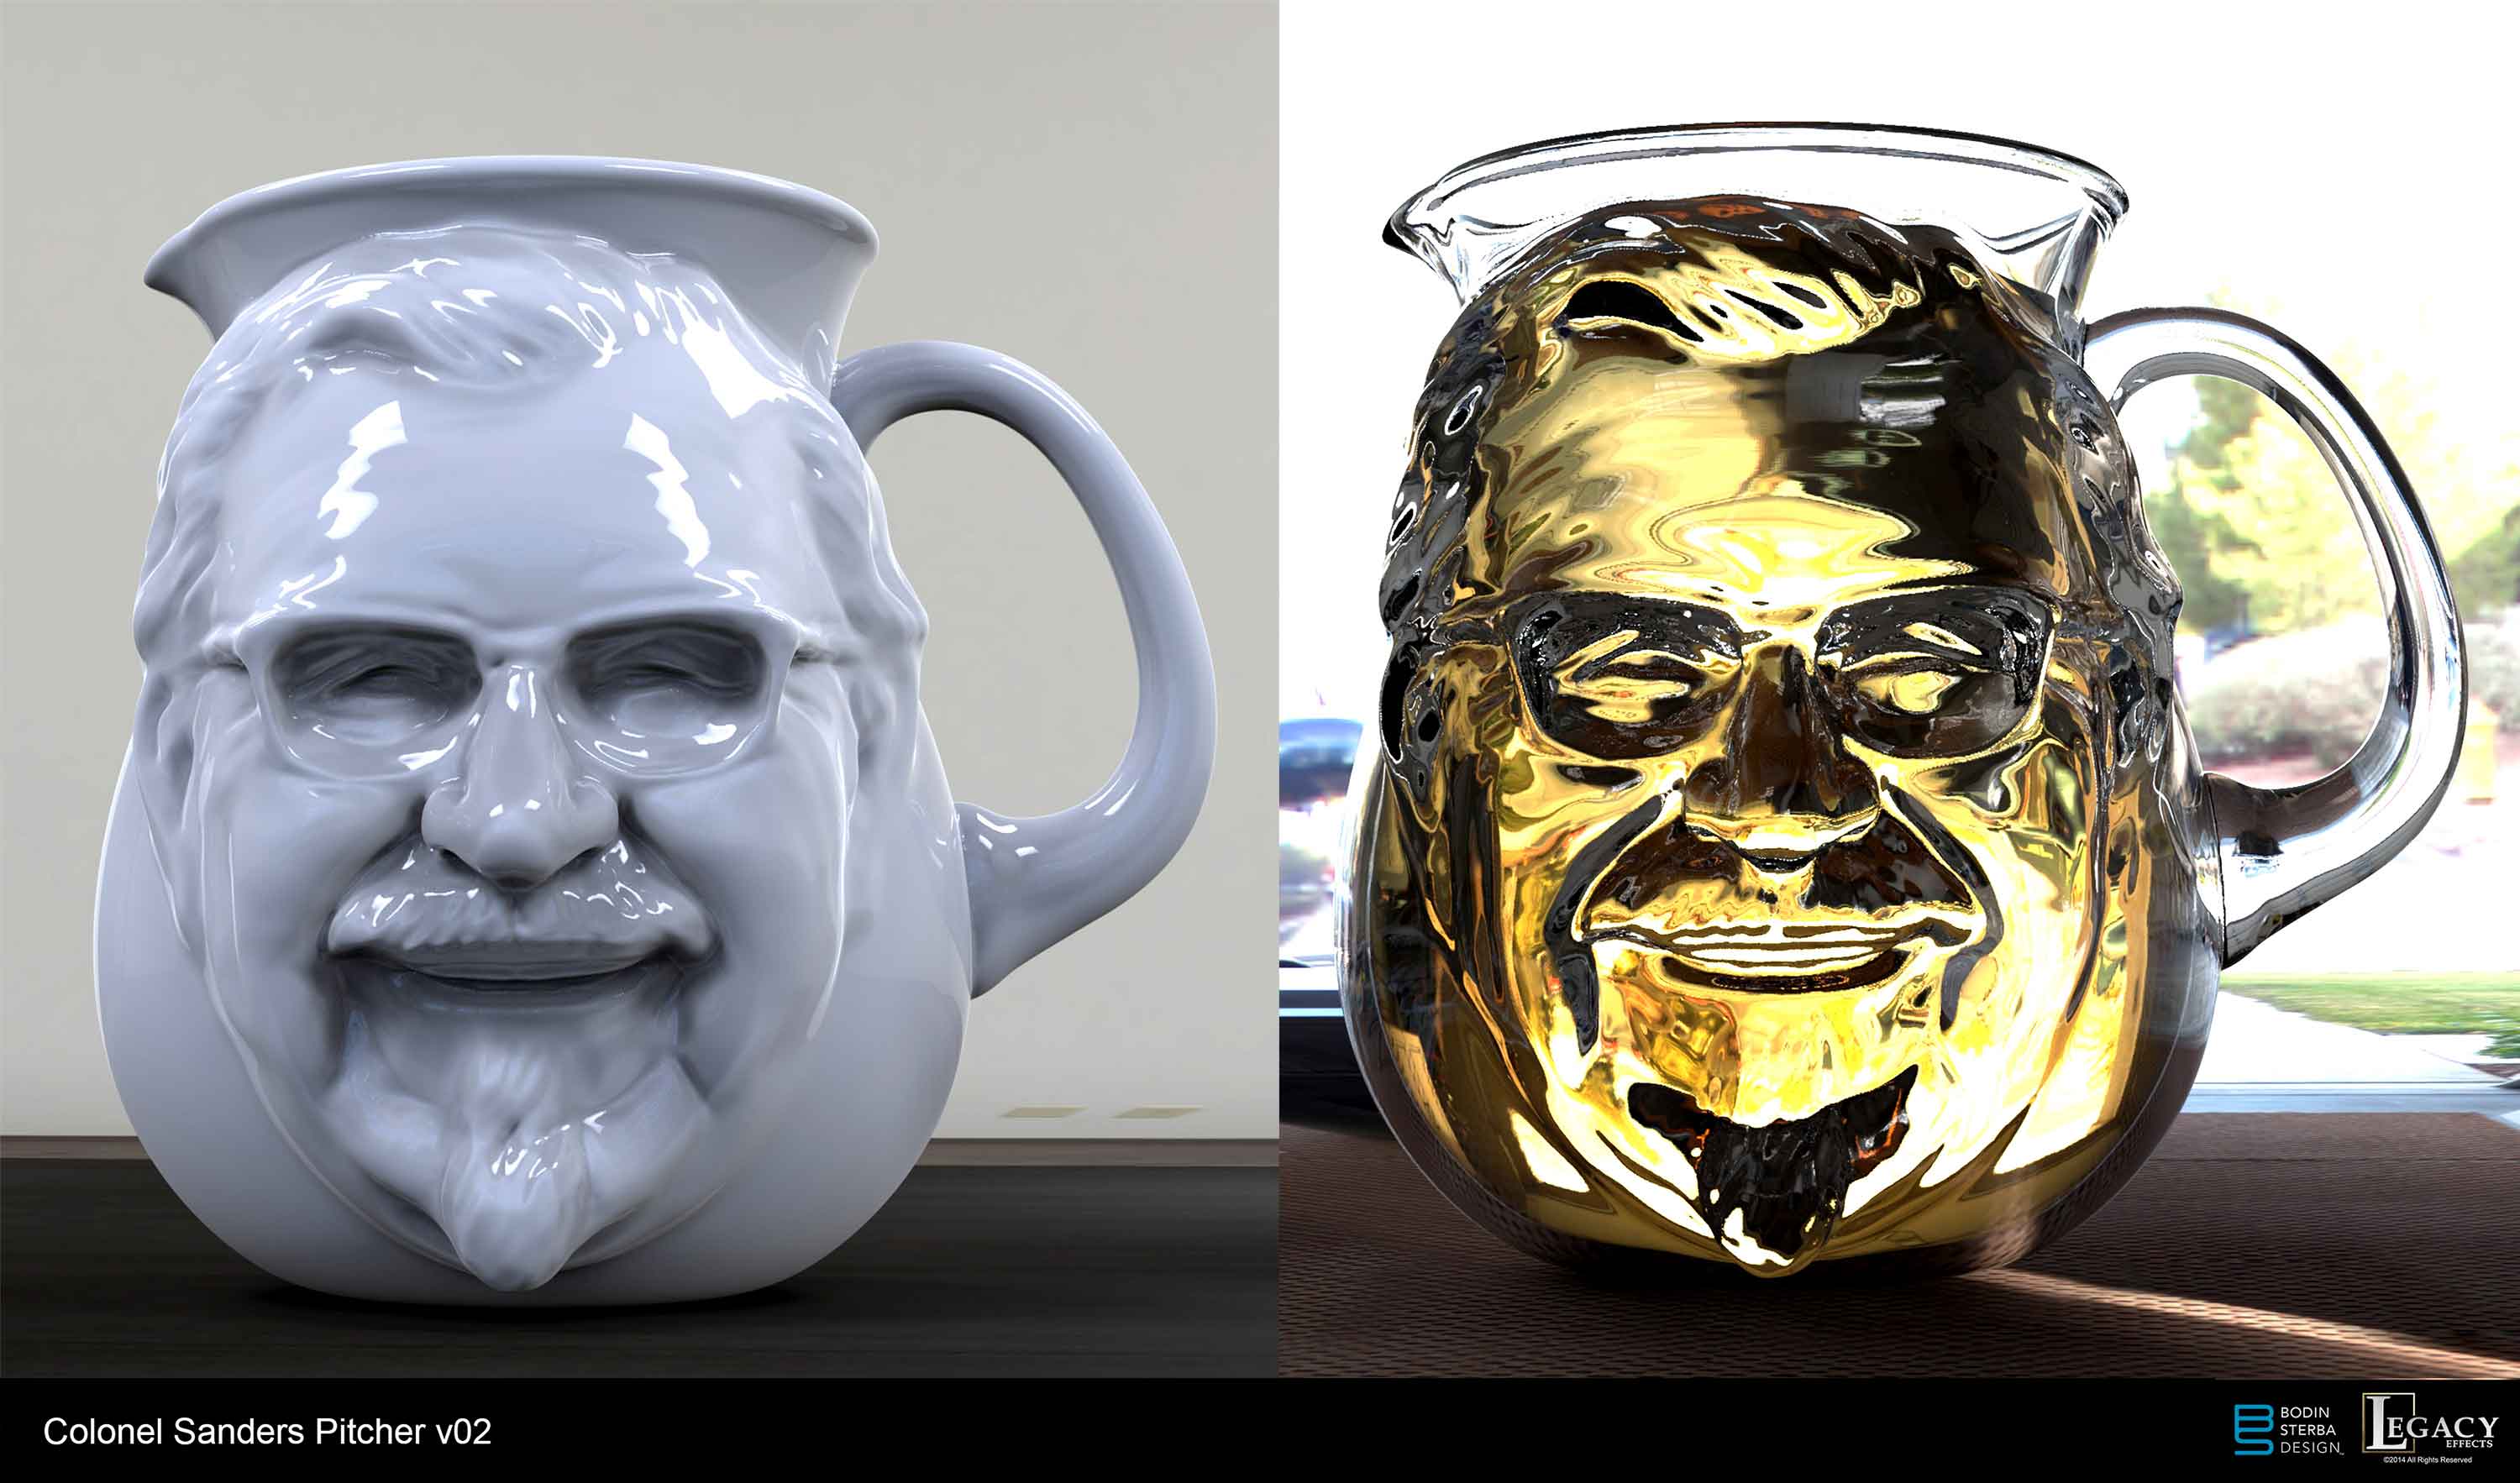 This is the first pass at the Colonel Sanders pitcher